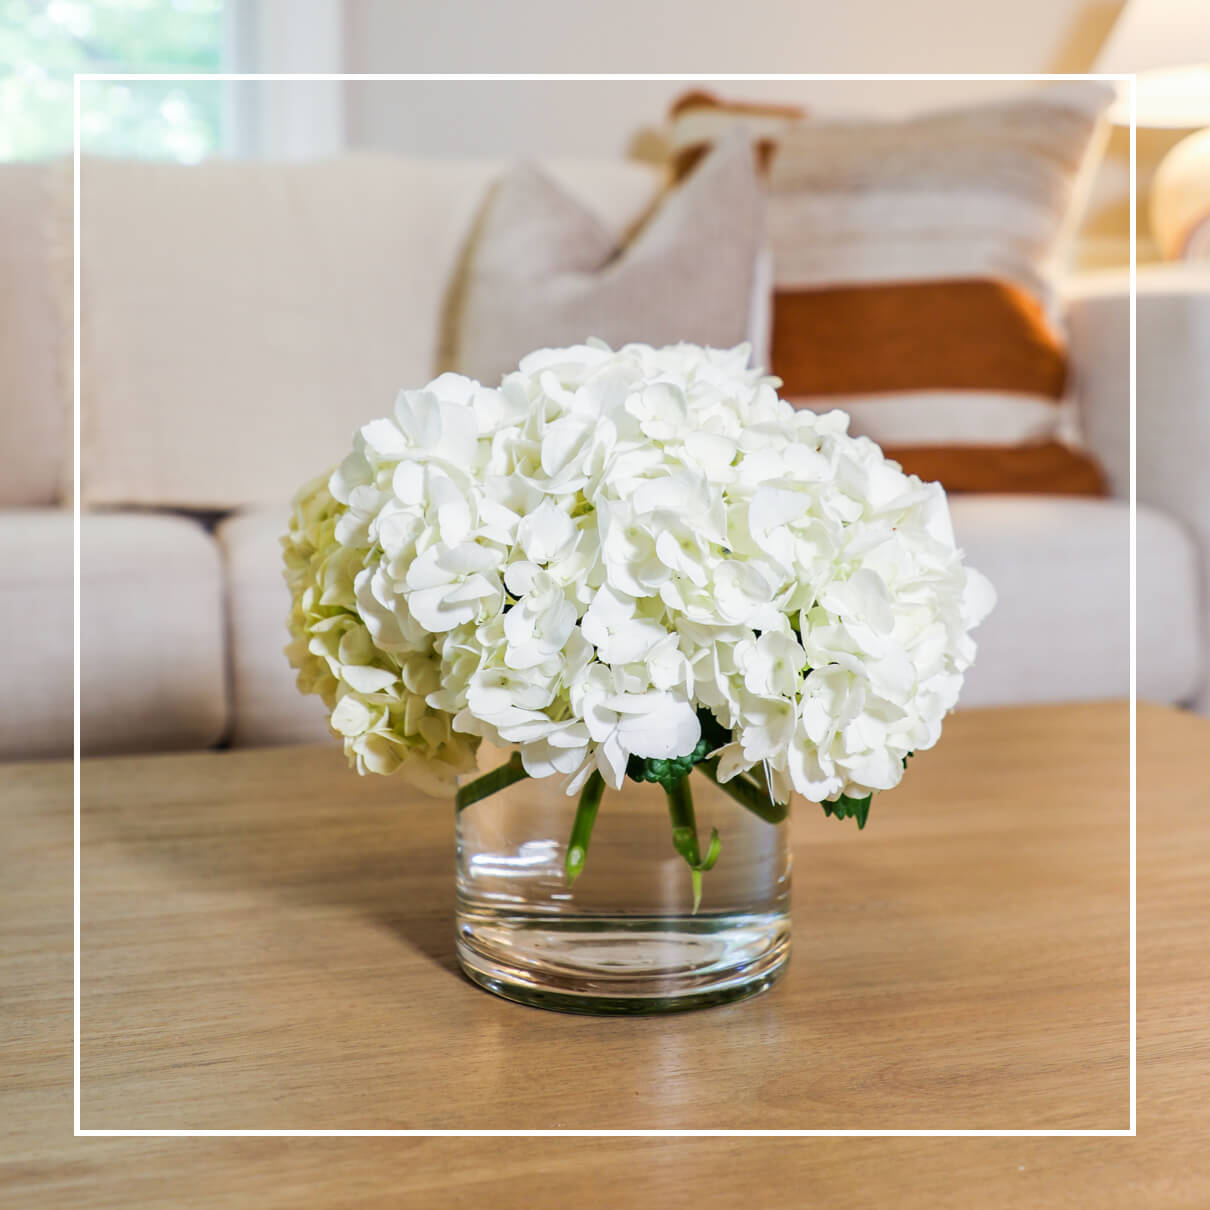 White lowers on table | Roots to Stillness